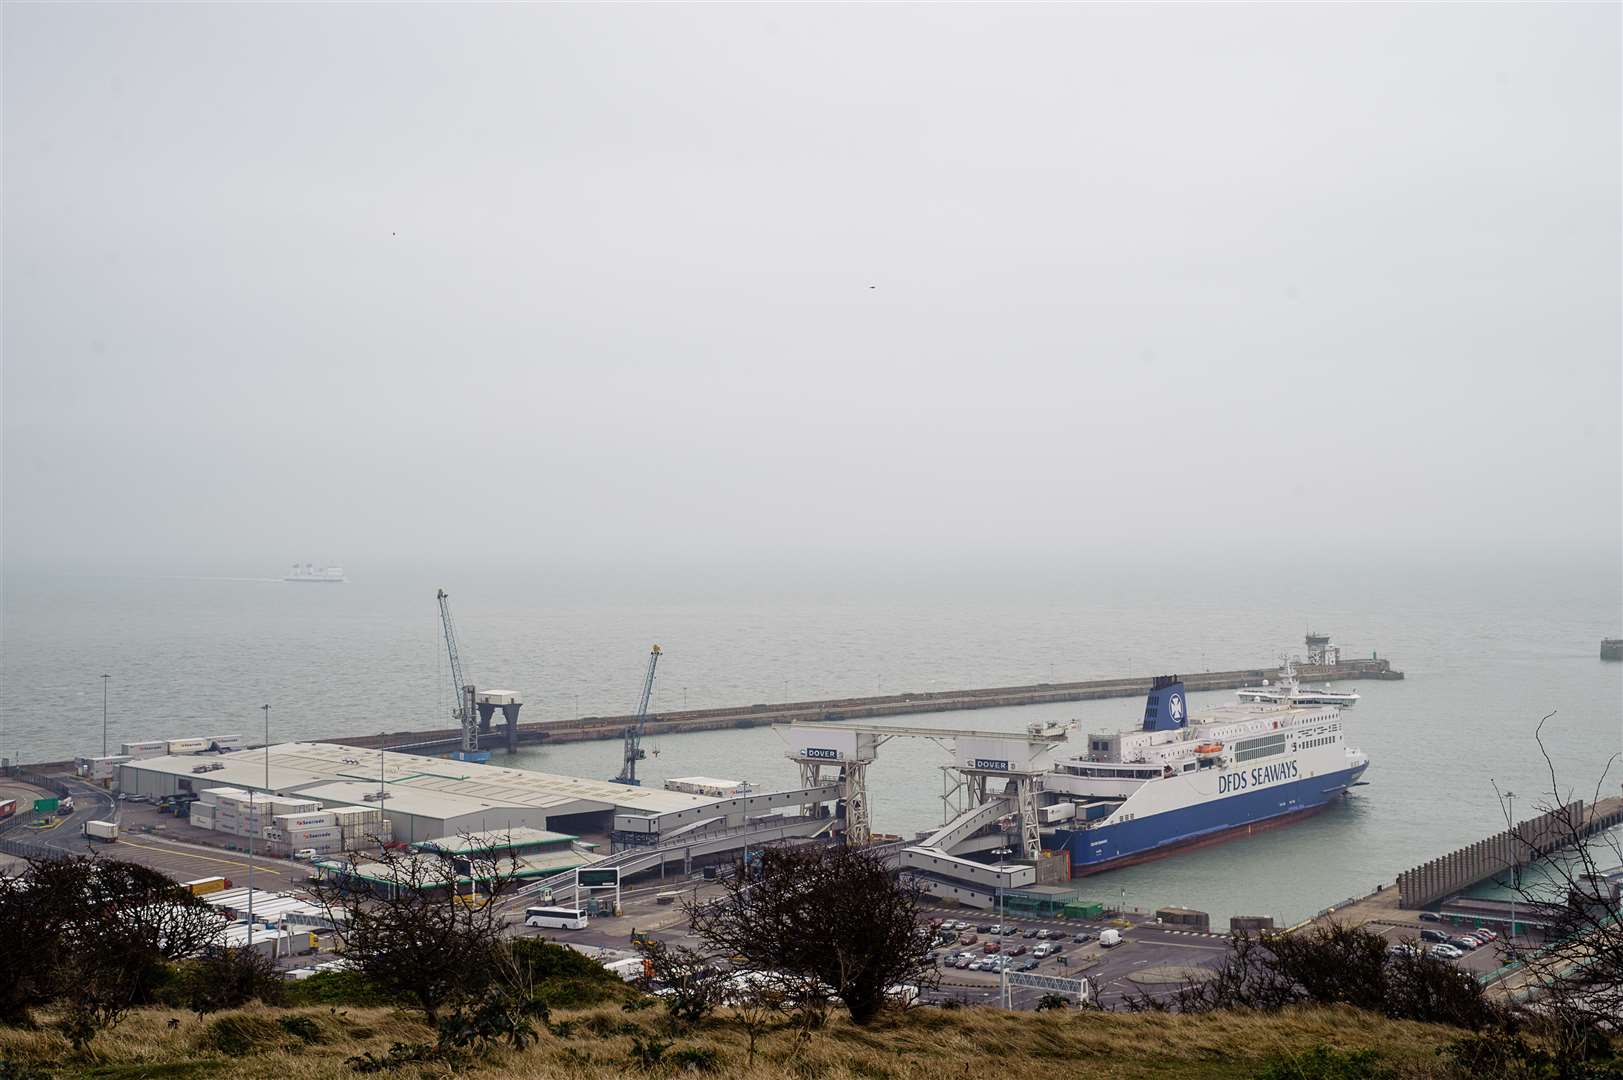 Dover to Calais crossings have been severely affected